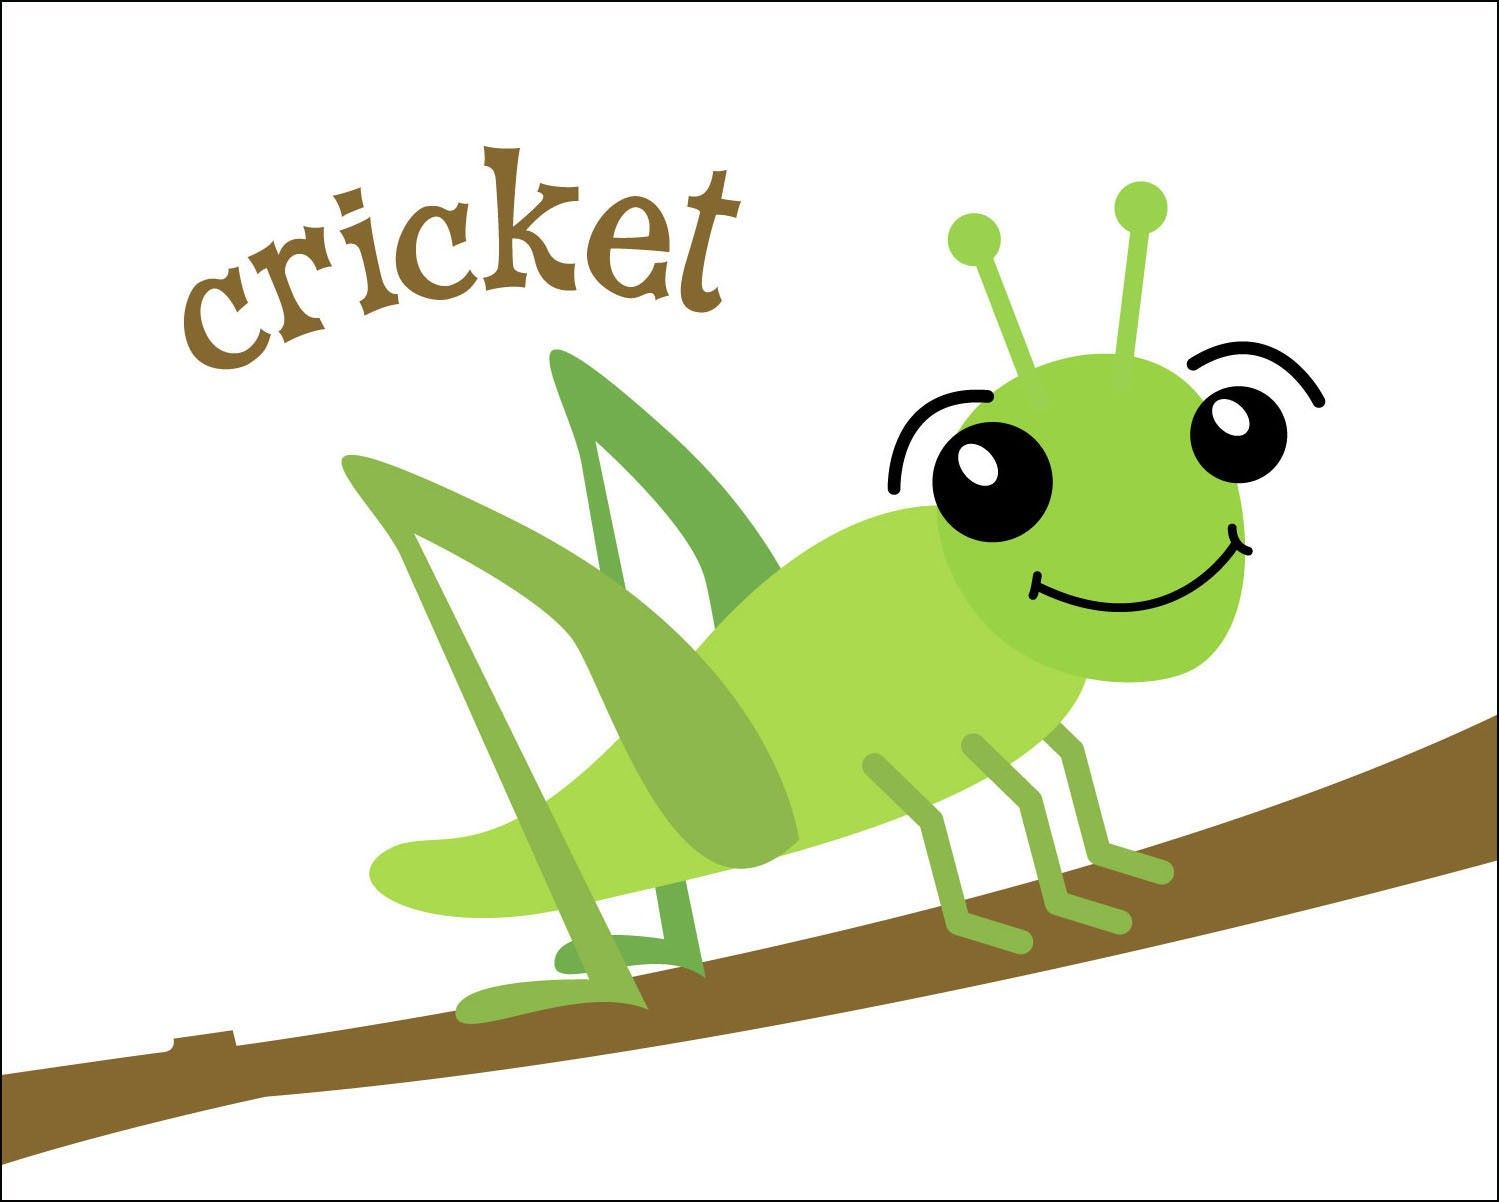 Crickets are annoying.